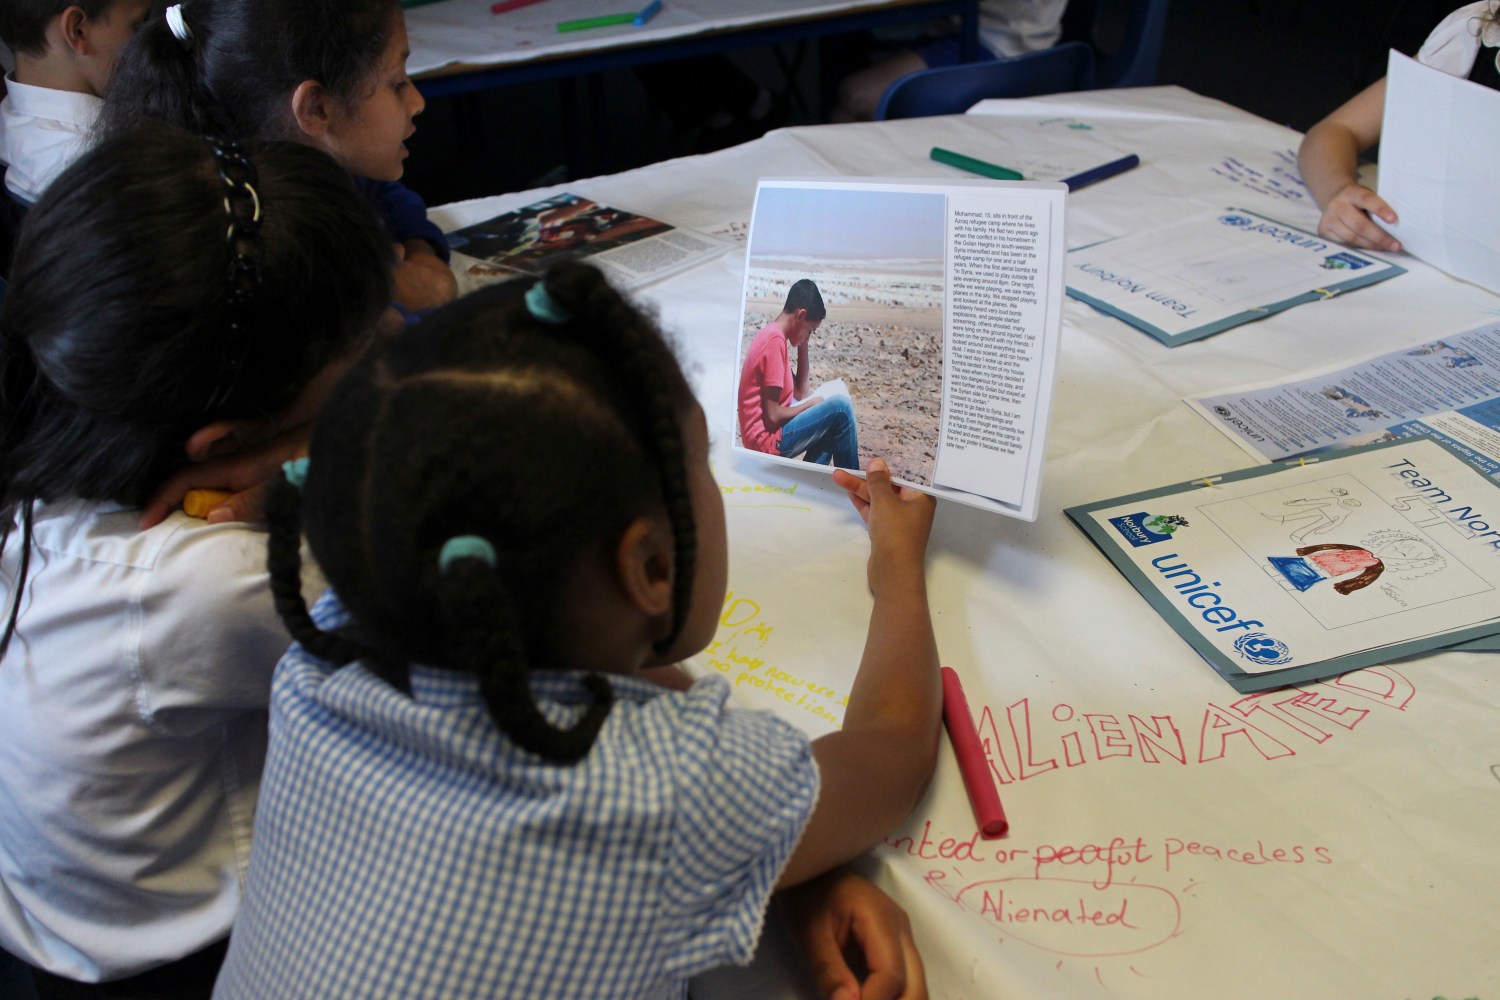 Primary school children, including those with refugee backgrounds, read real-life stories about refugees during a classroom lesson about the refugee crisis at Norbury School in Harrow